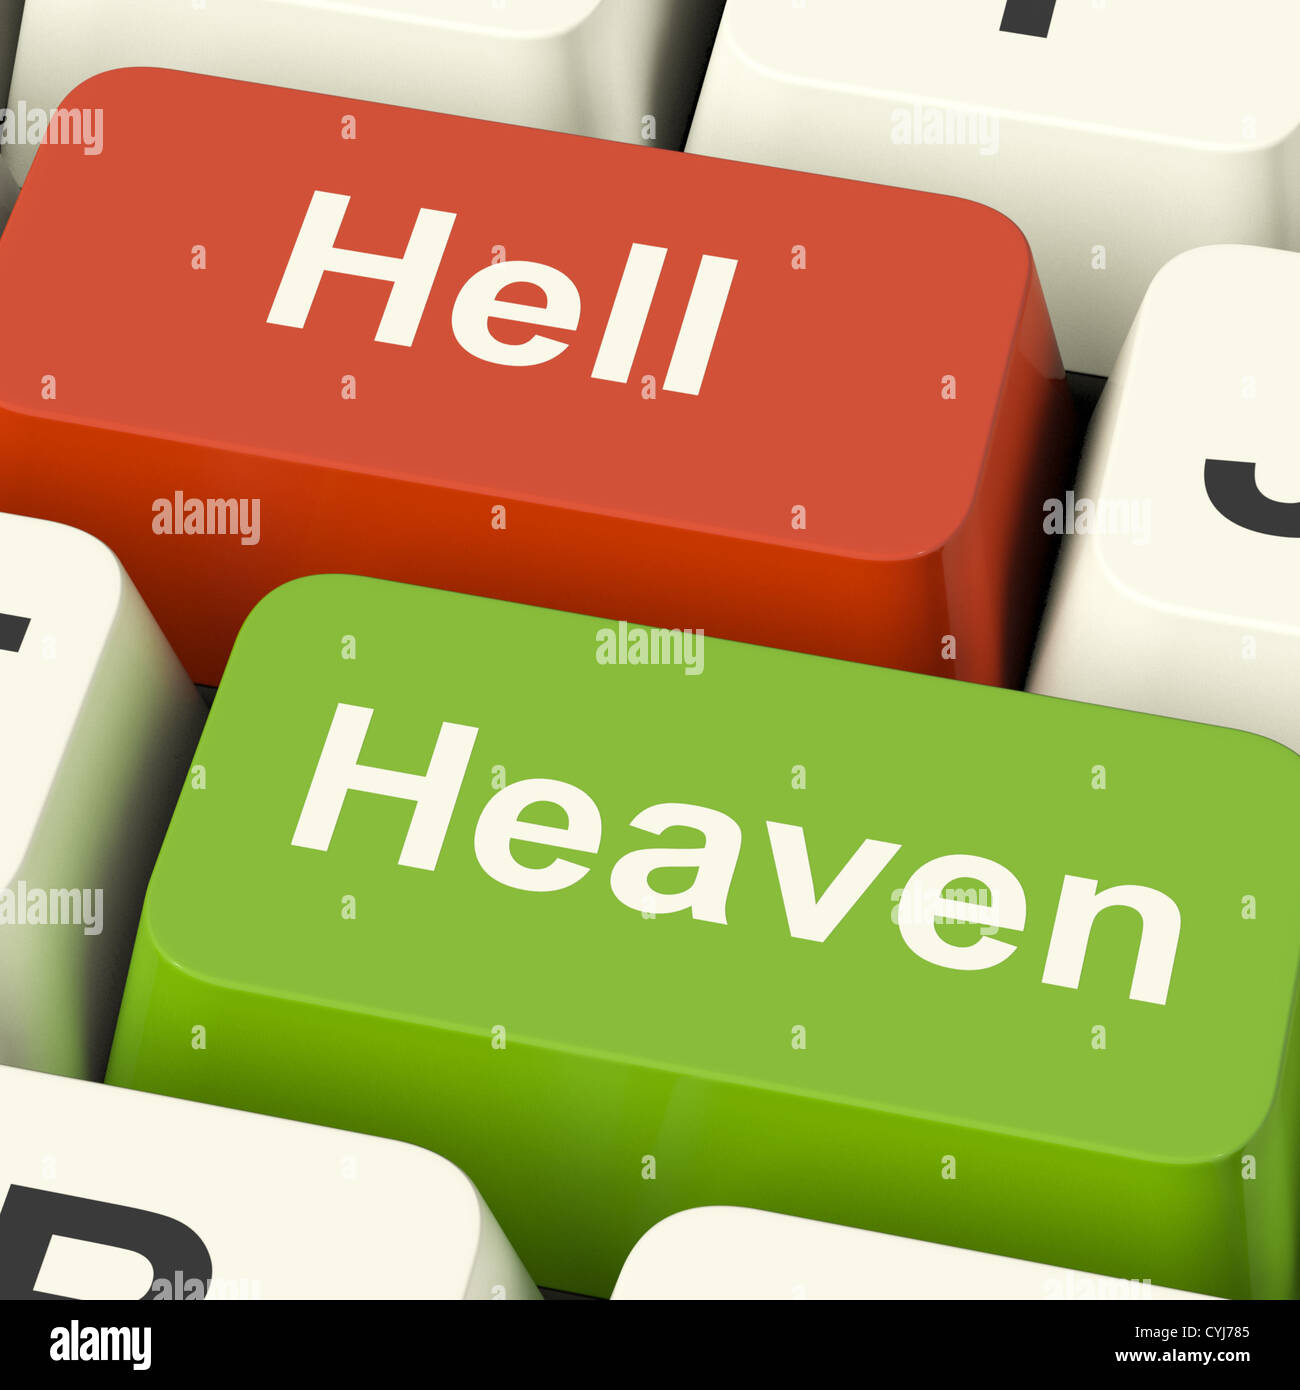 Heaven Hell Computer Keys Shows Choice Between Good And Evil Online Stock Photo